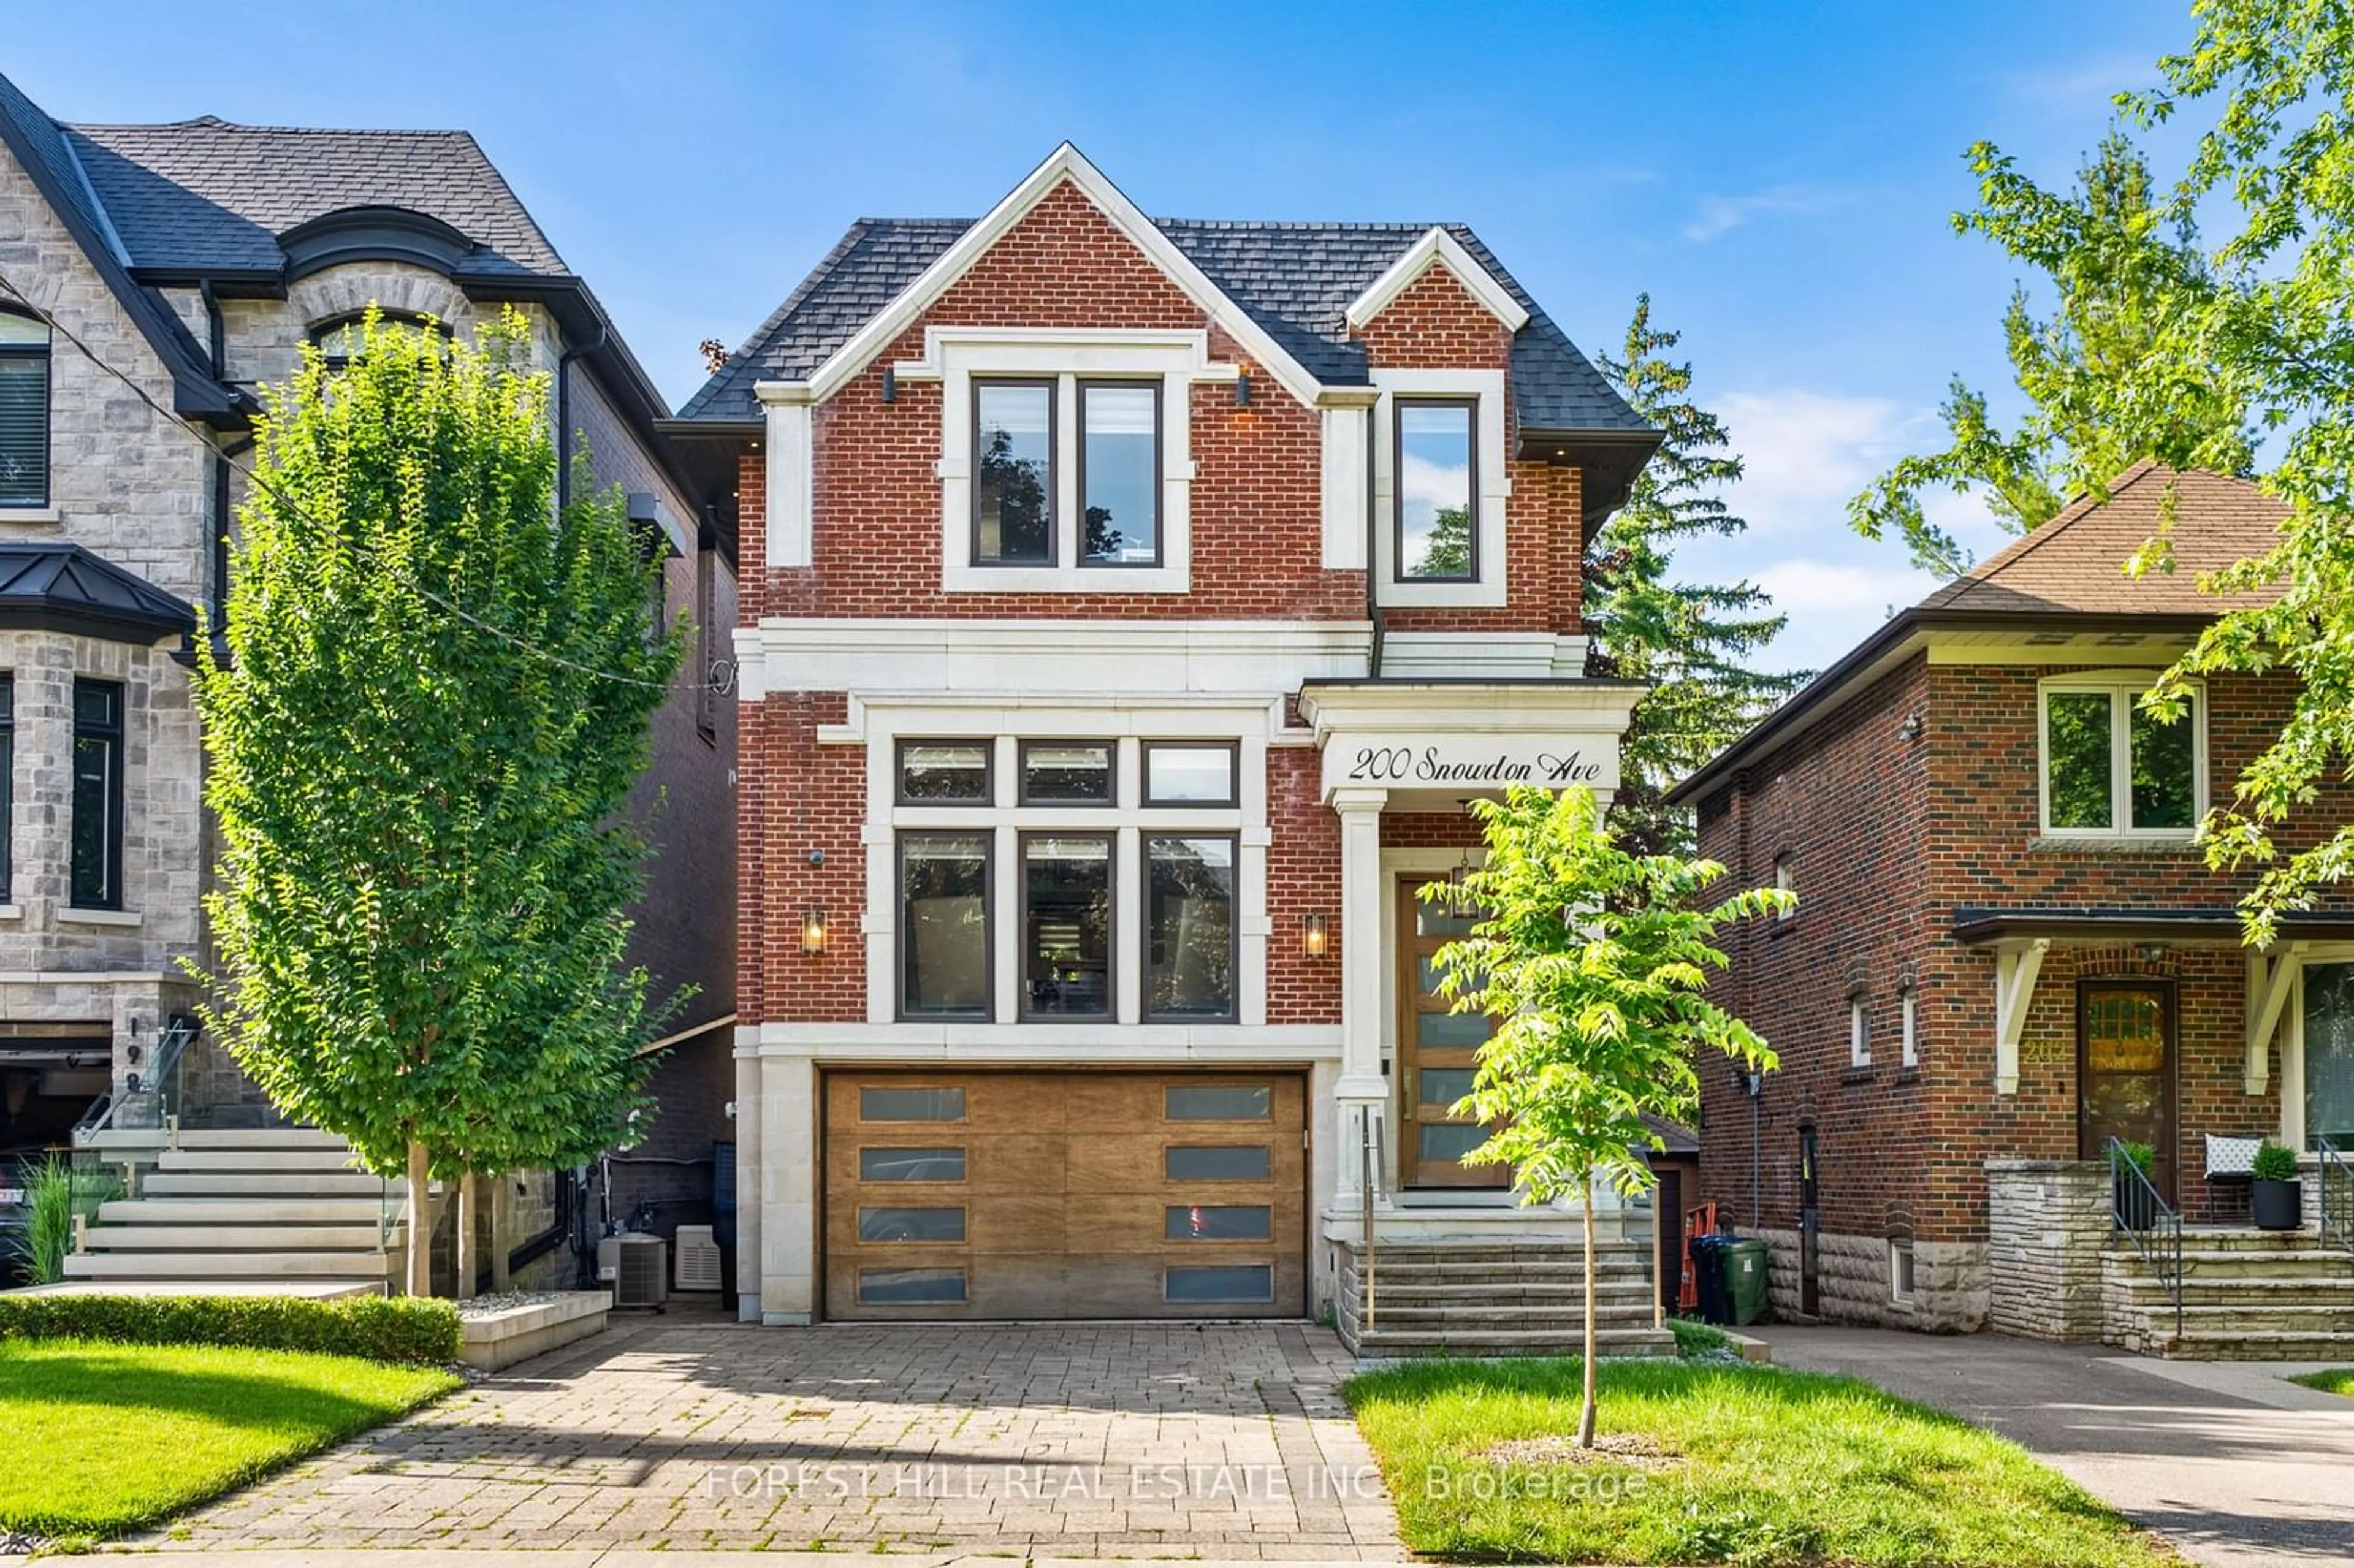 Home with brick exterior material for 200 Snowdon Ave, Toronto Ontario M4N 2B2